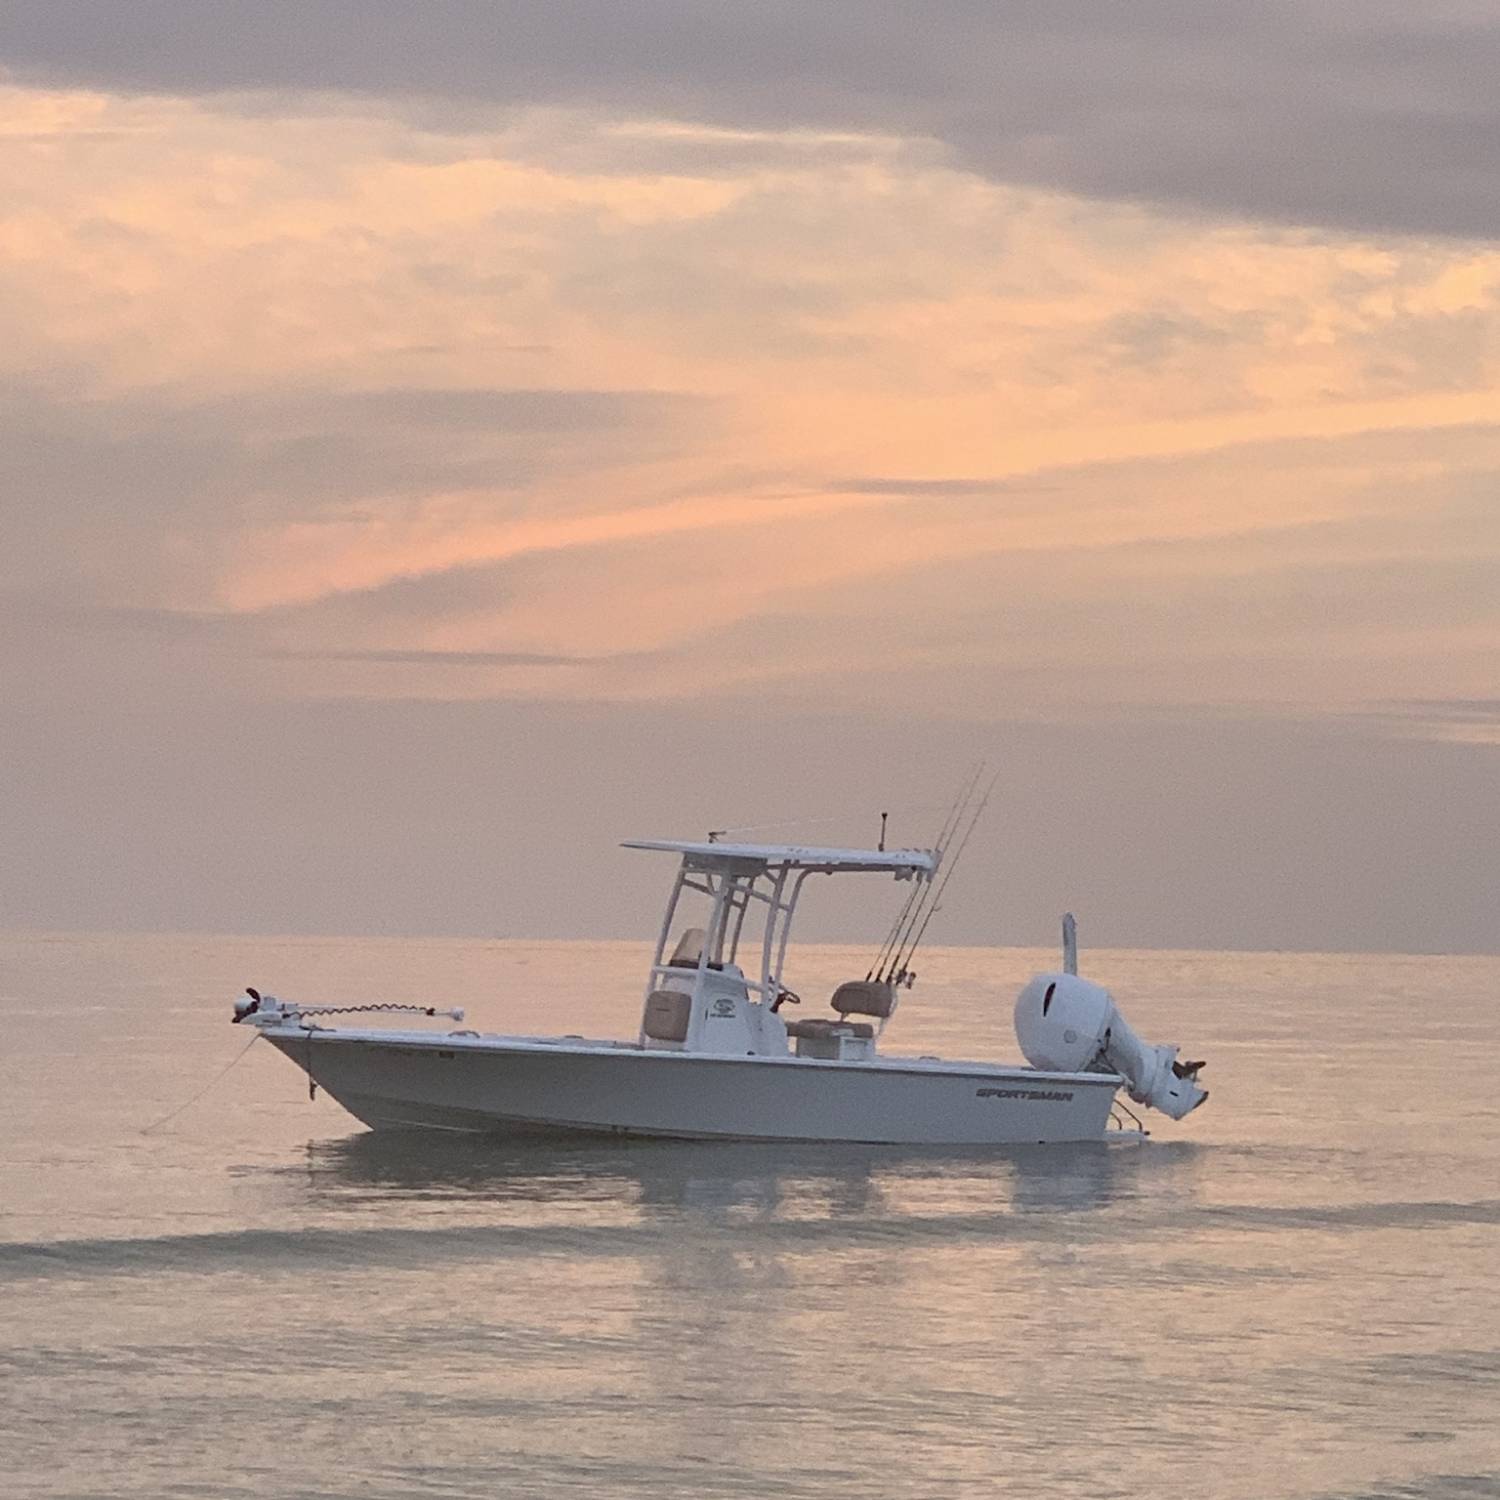 Title: The Amanda Marie - On board their Sportsman Masters 227 Bay Boat - Location: Forgotten Coast. Participating in the Photo Contest #SportsmanMay